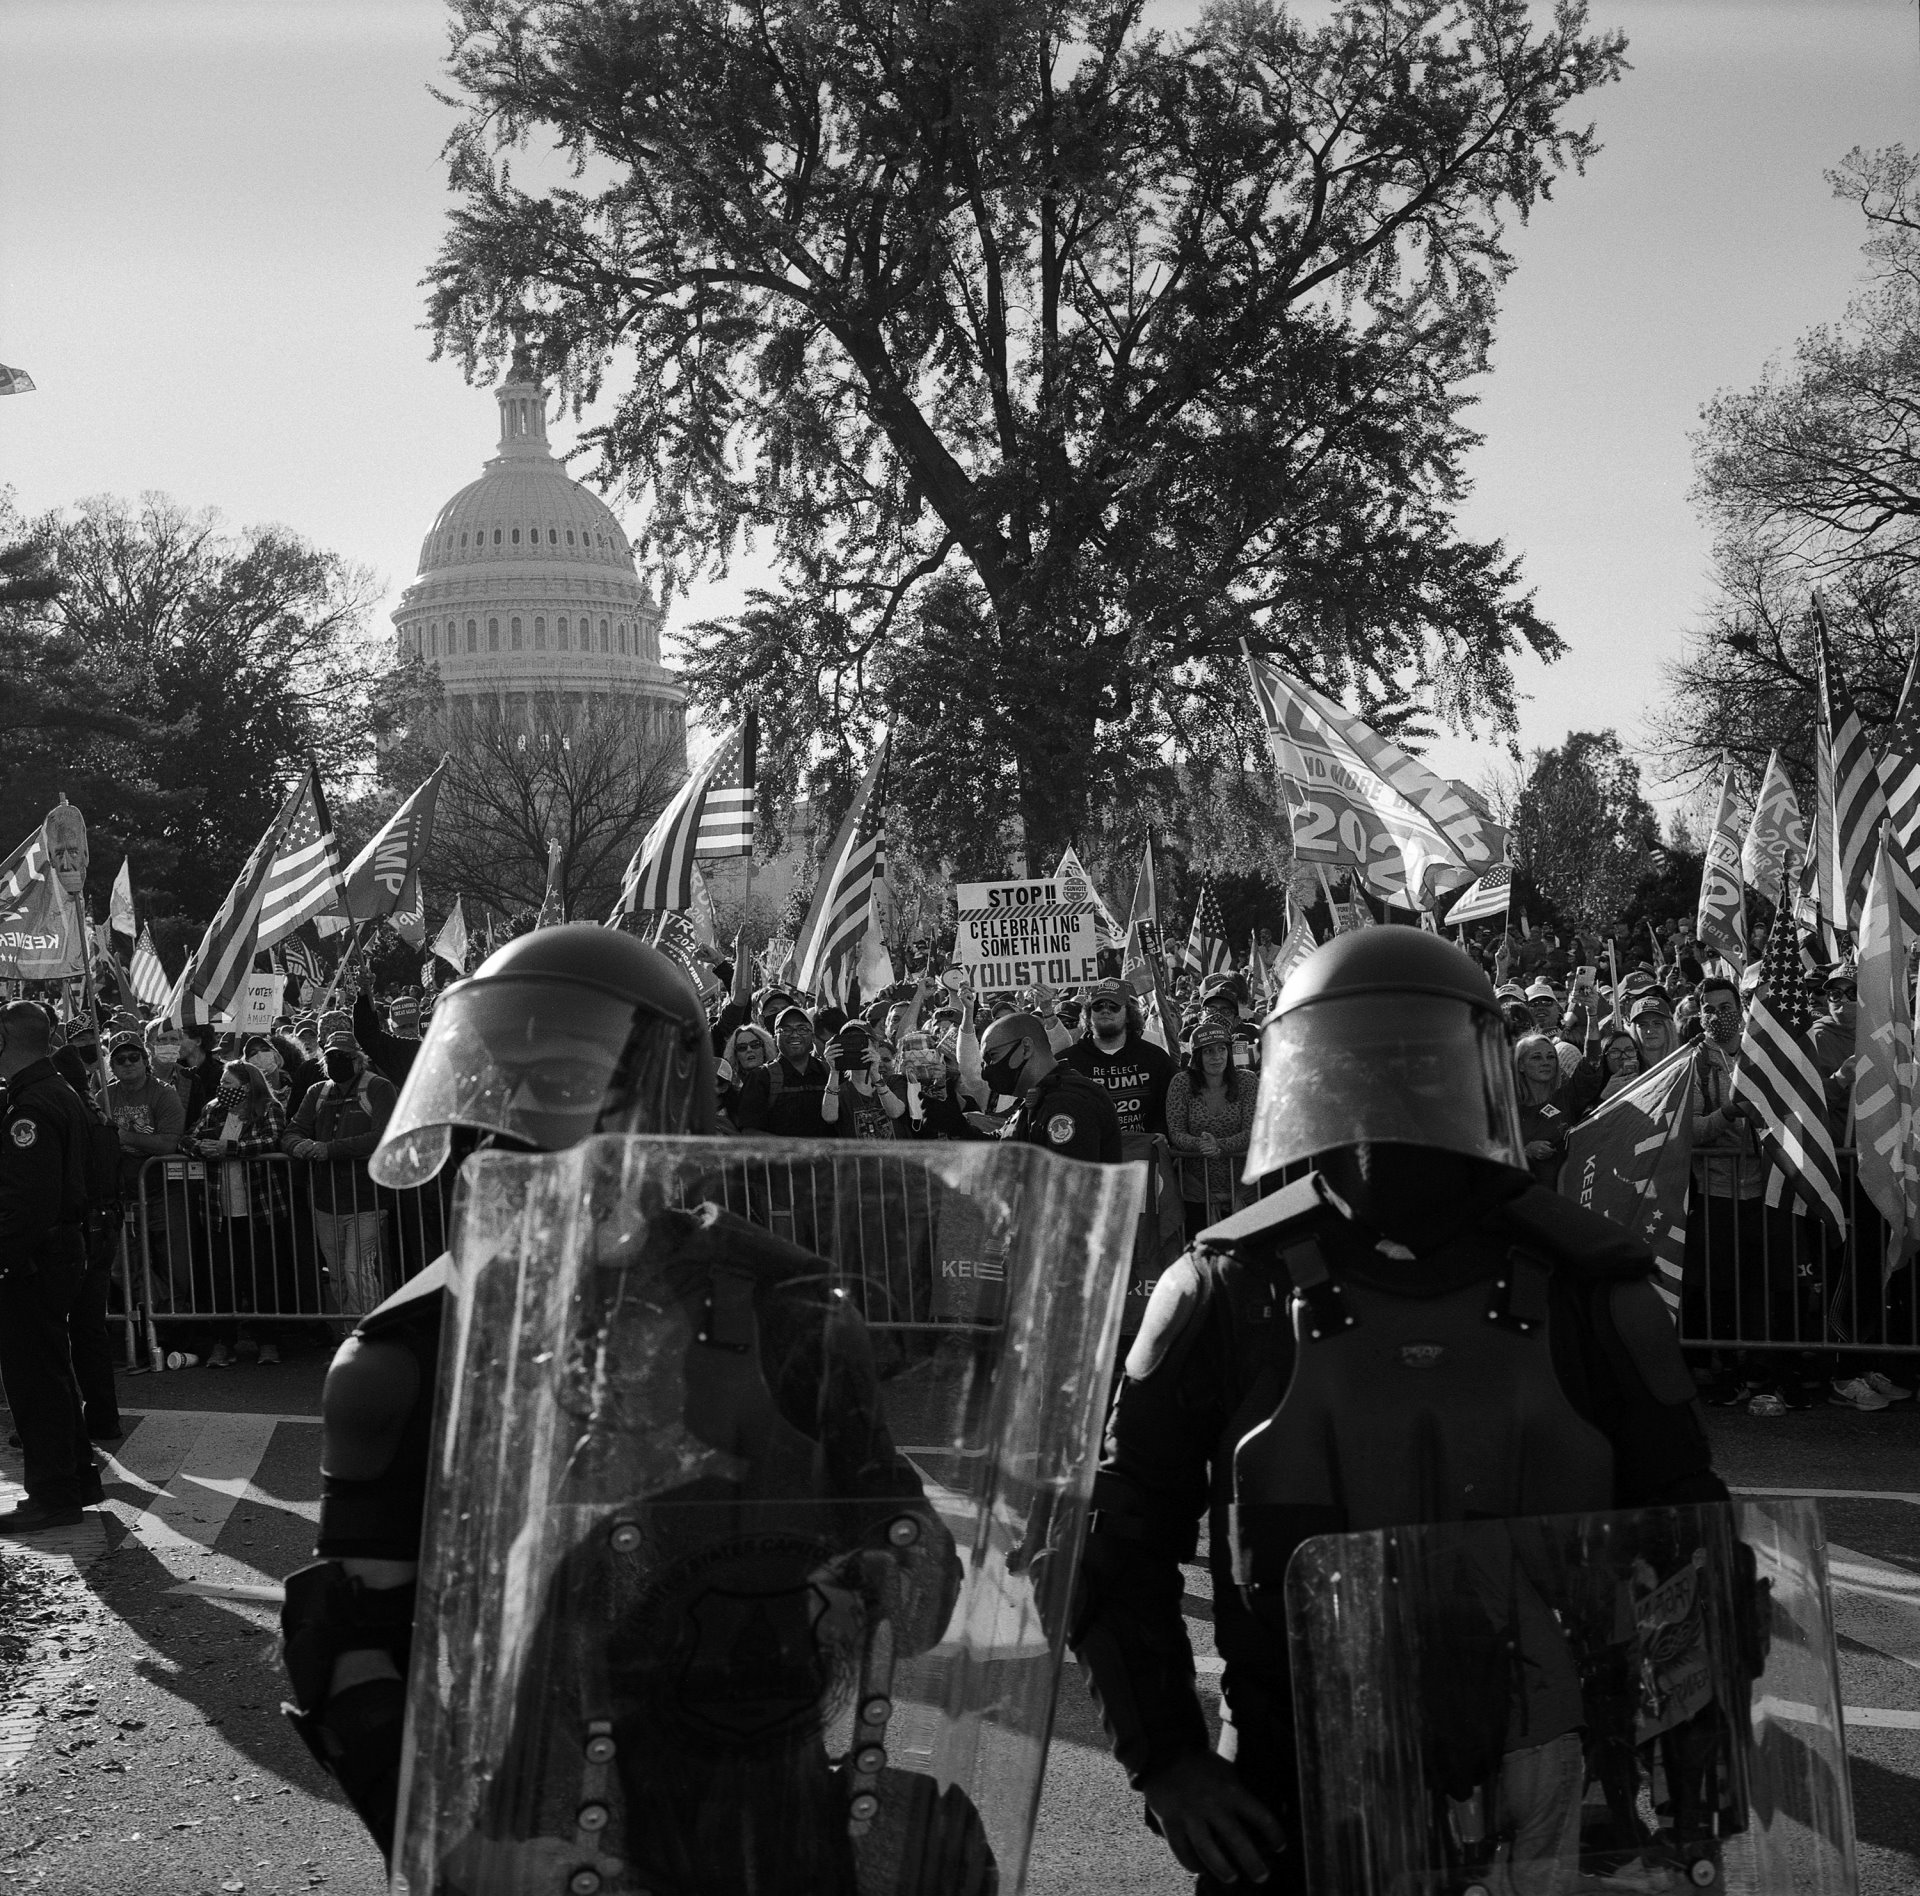 Police officers in riot gear stand between thousands of pro-Trump demonstrators and a much smaller number of counter-protesters in front of the Supreme Court, in Washington DC, USA. The &lsquo;Make America Great Again&rsquo; march, &nbsp;organized to protest the election results, was the first of two demonstrations considered to be a build up to the storming of the Capitol on 6 January 2021.